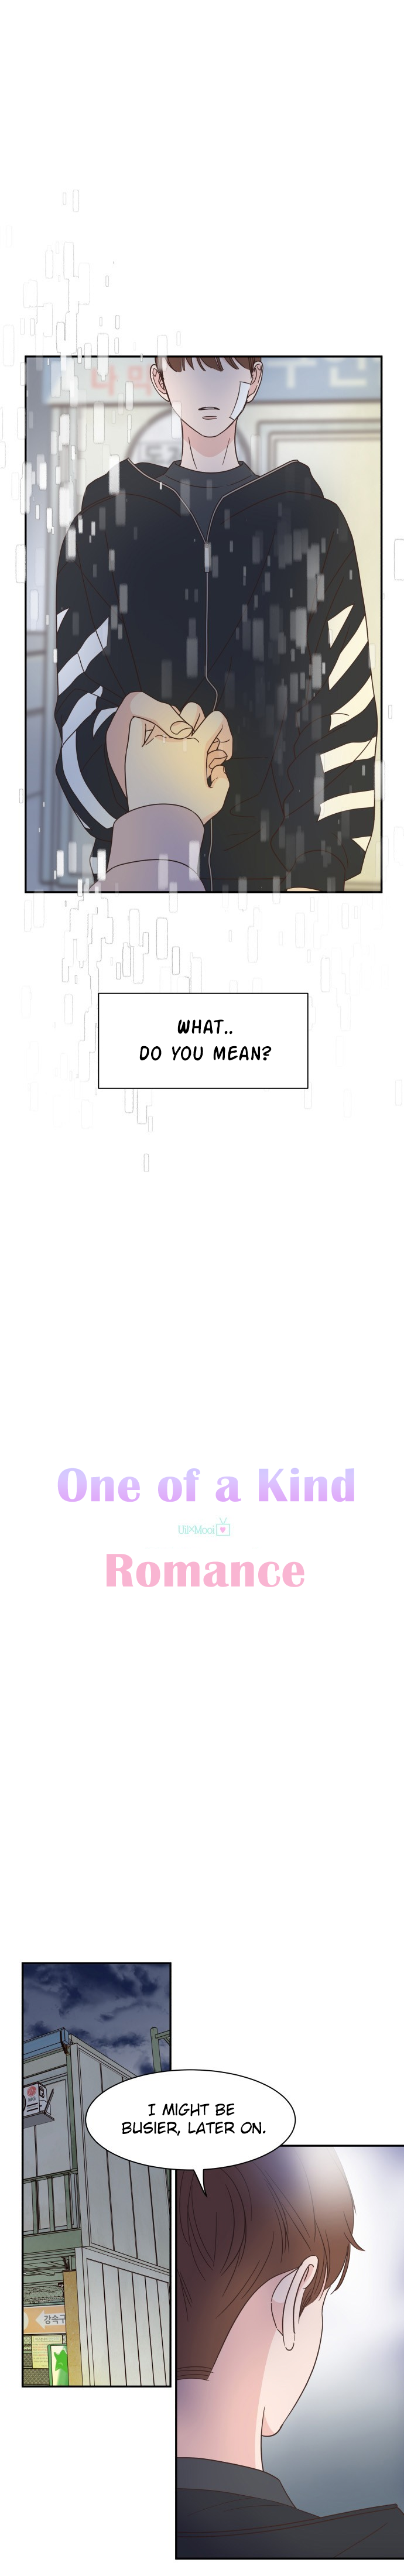 One Of A Kind Romance - Page 3